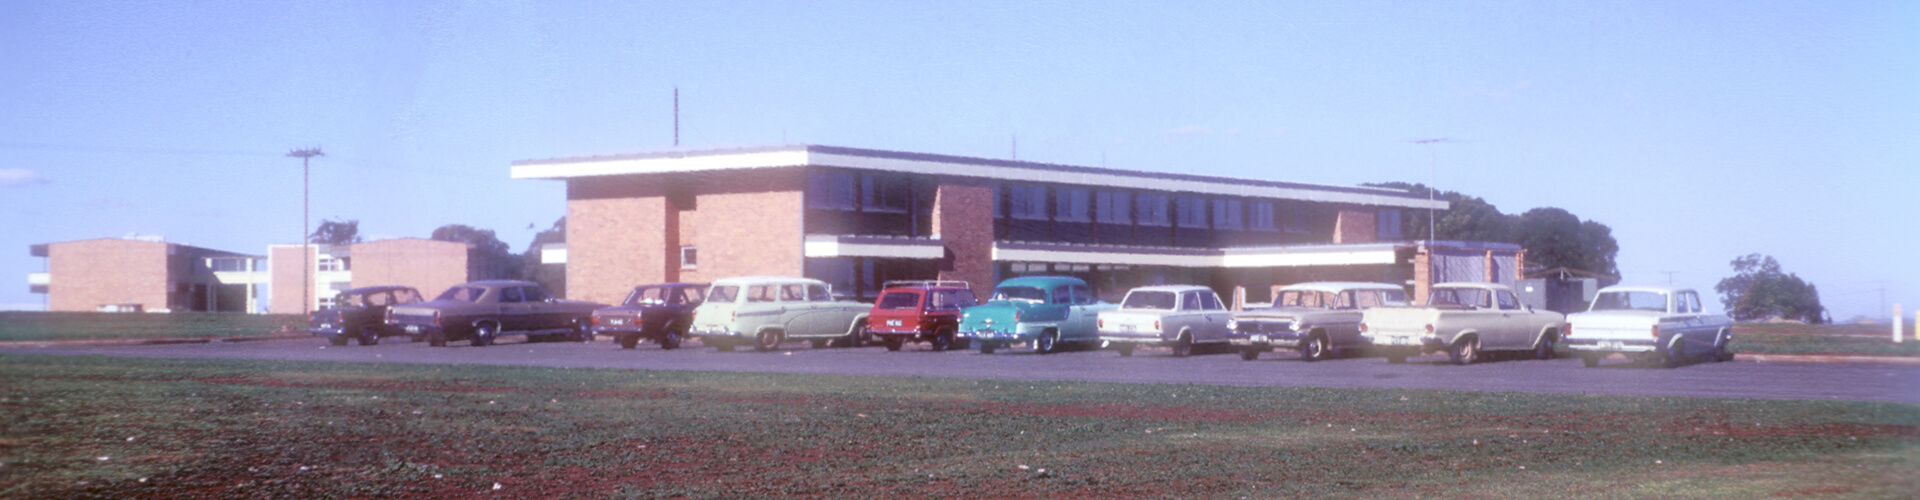 The Toowoomba campus in 1975.